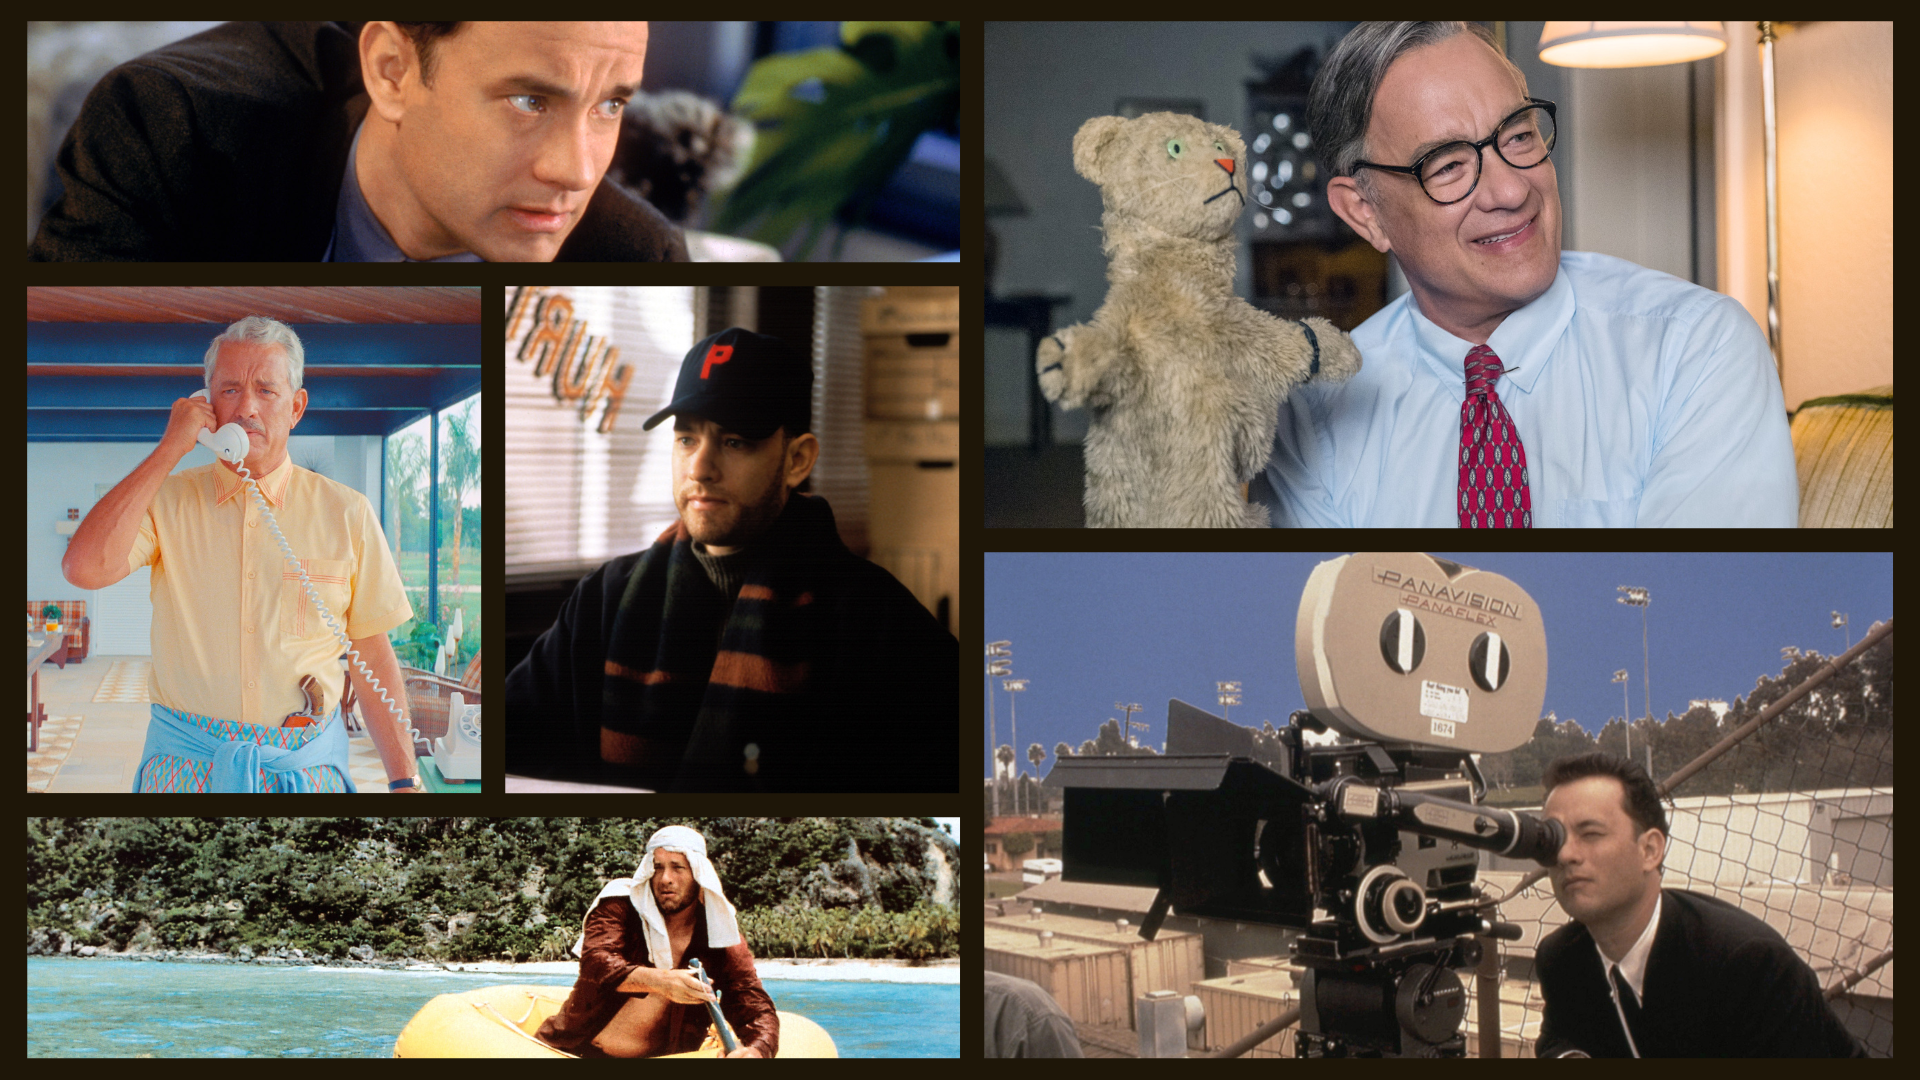 (Clockwise from bottom left, left to right per row): "Cast Away," "Asteroid City," "Philadelphia," "You've Got Mail," "A Beautiful Day in the Neighborhood," and Tom Hanks behind the scenes for "That Thing You Do!"